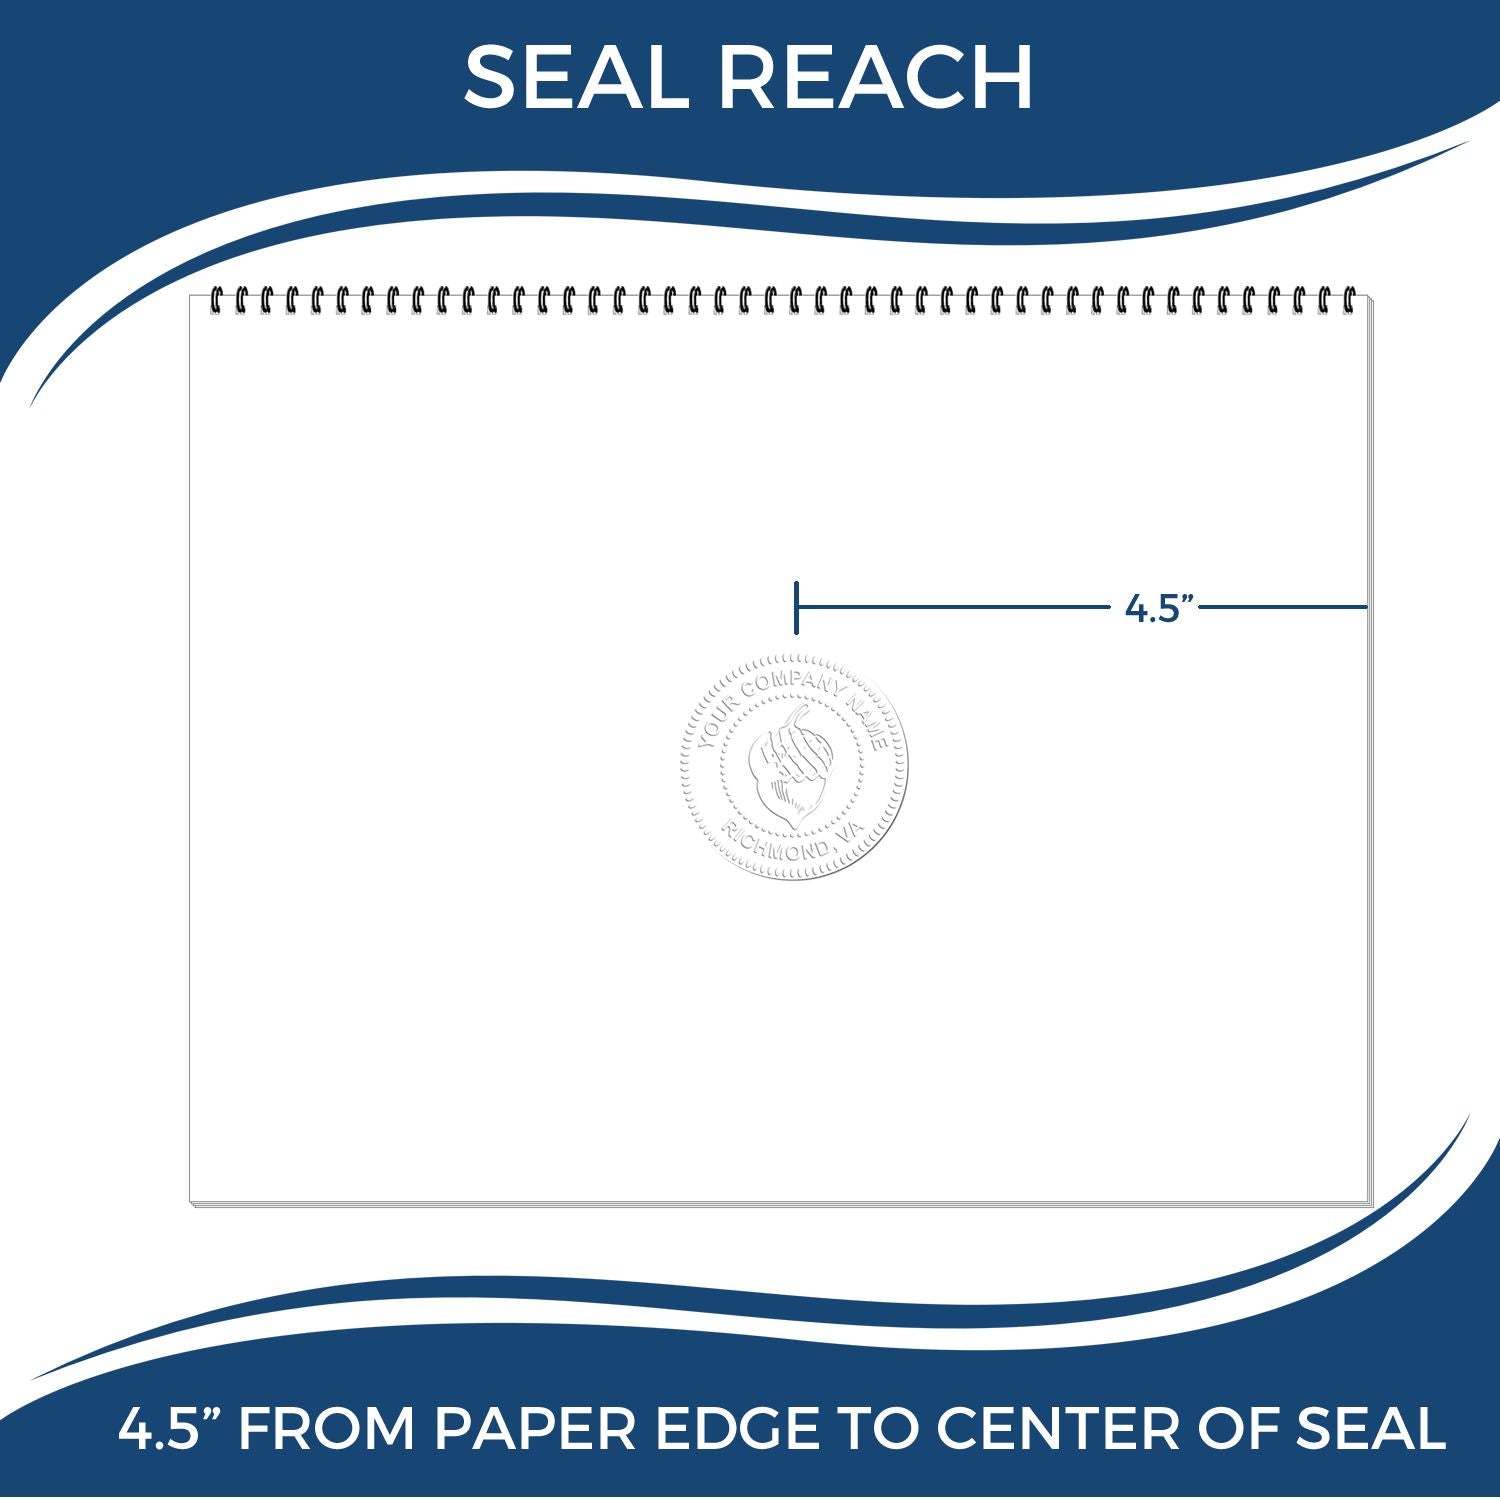 An infographic showing the seal reach which is represented by a ruler and a miniature seal image of the Extended Long Reach Vermont Architect Seal Embosser